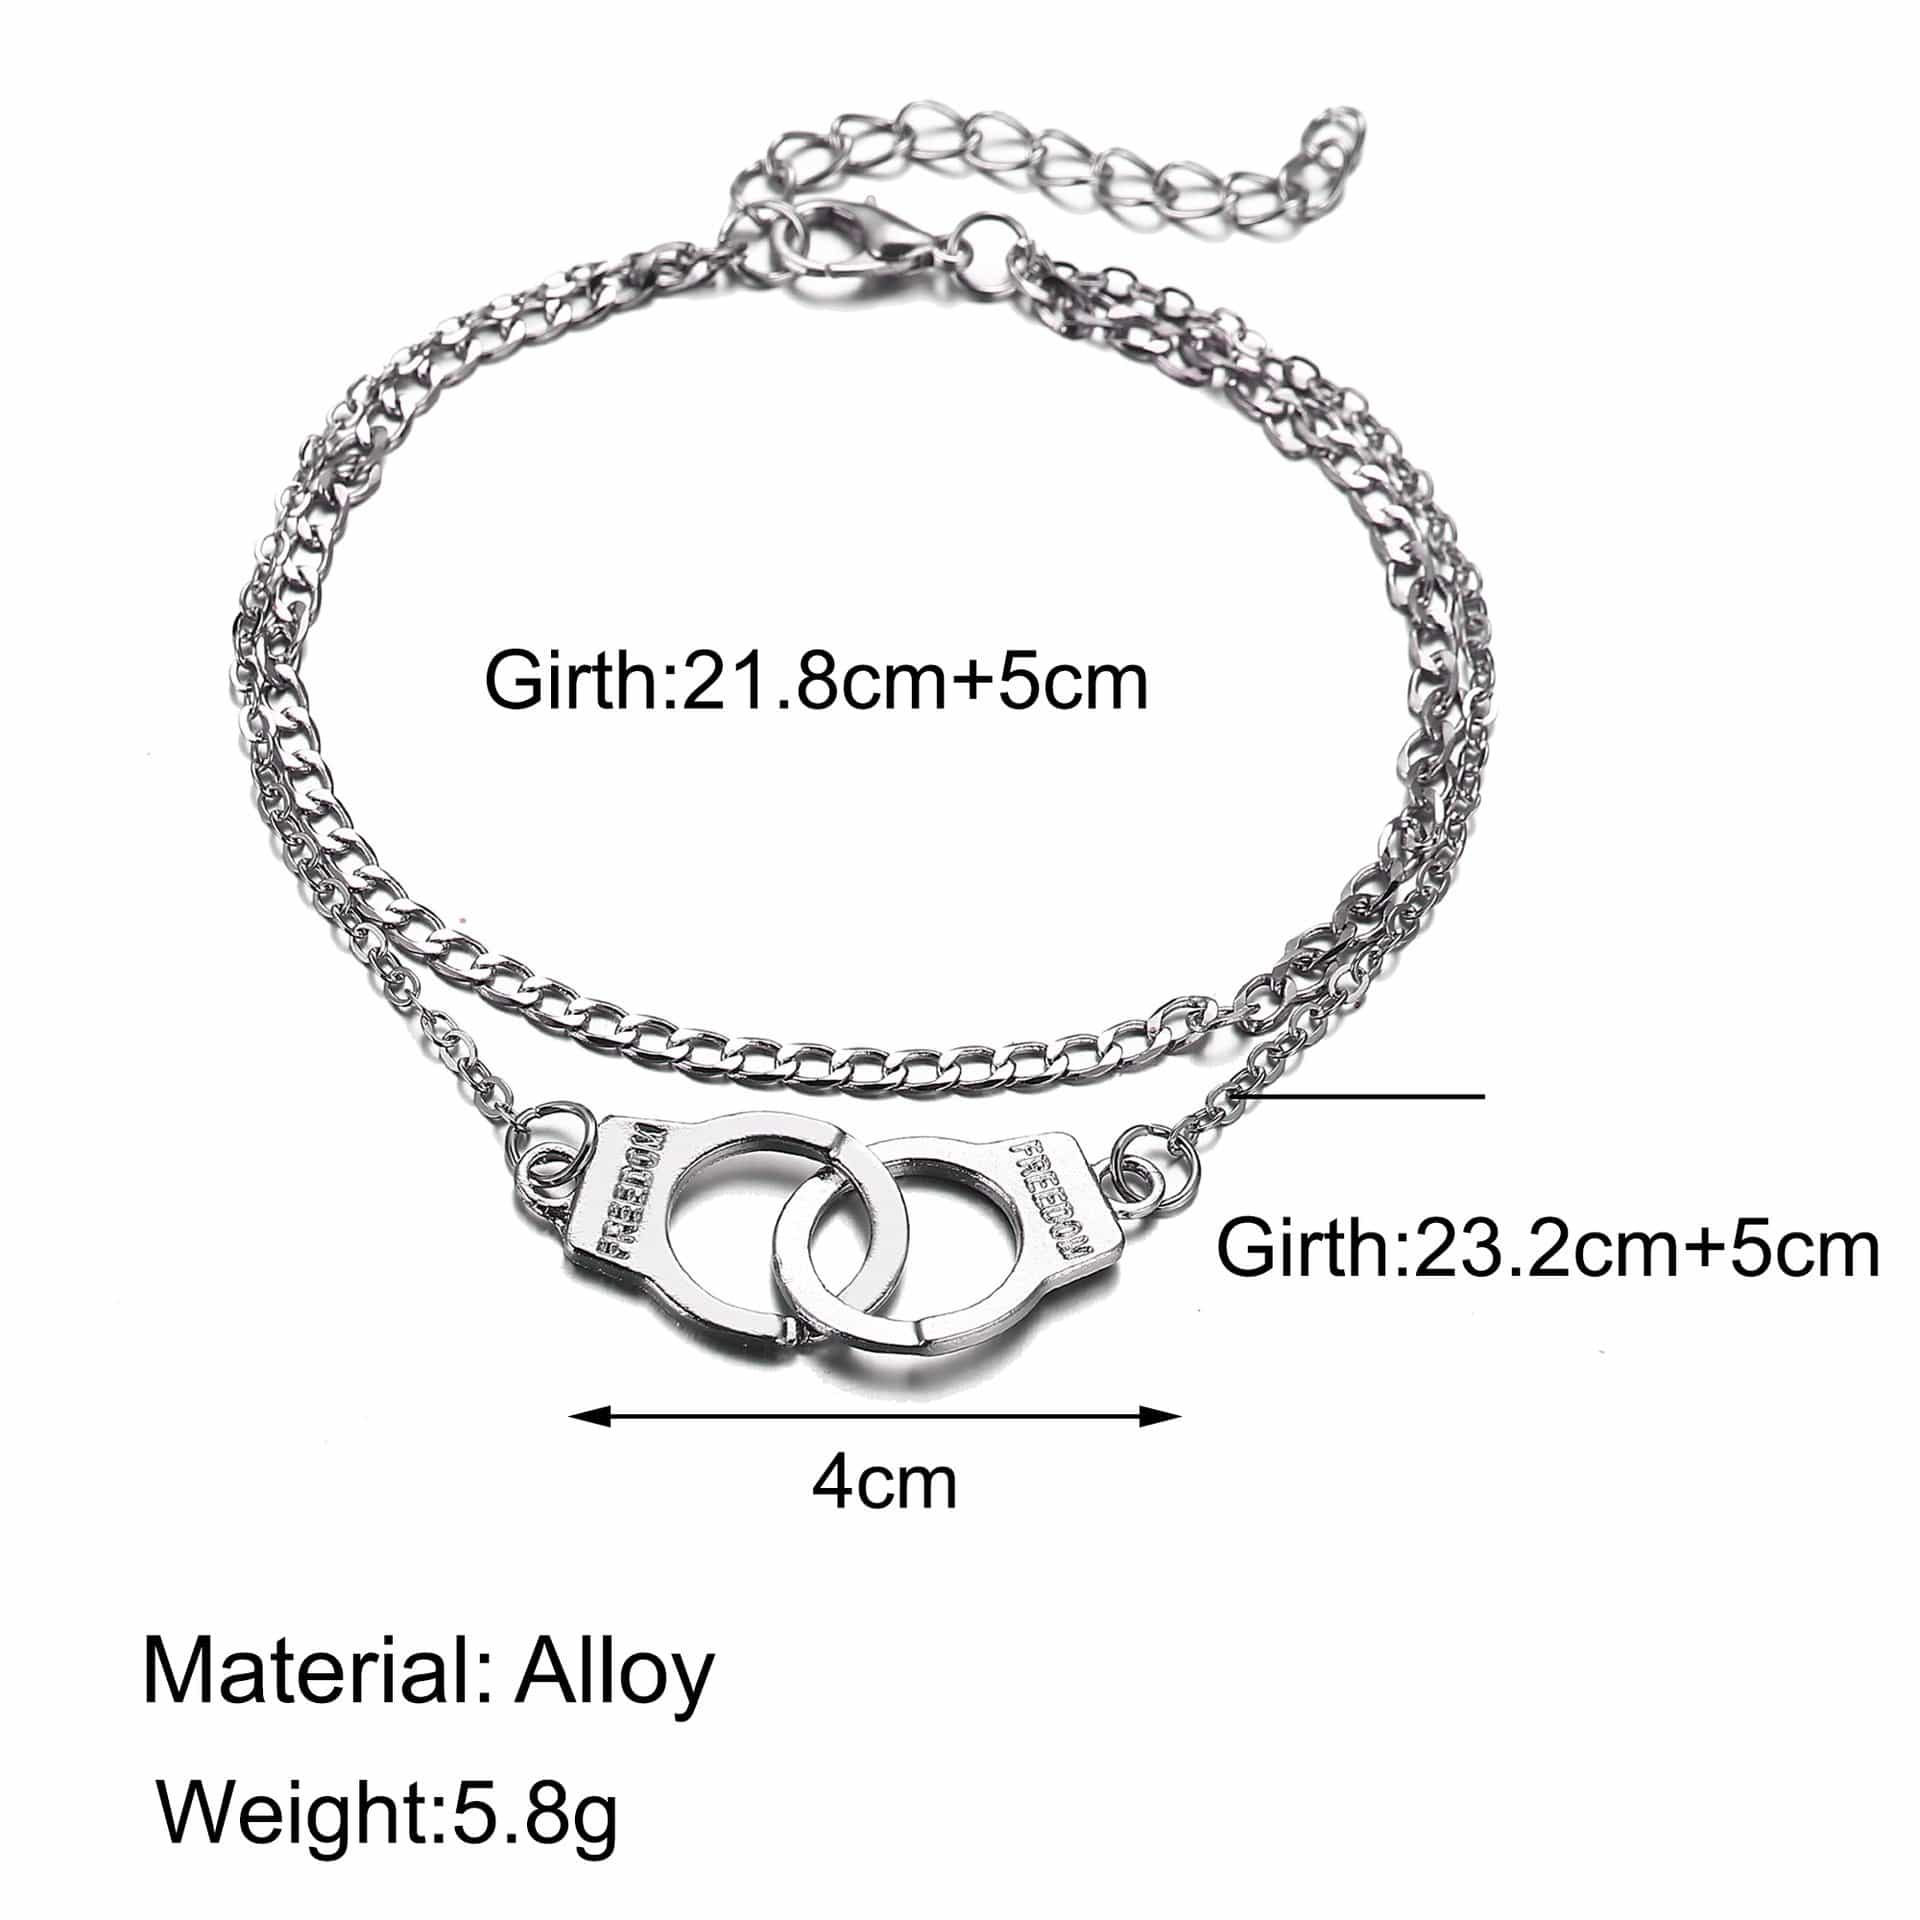 Handcuffs-Inspired Sexy Anklets